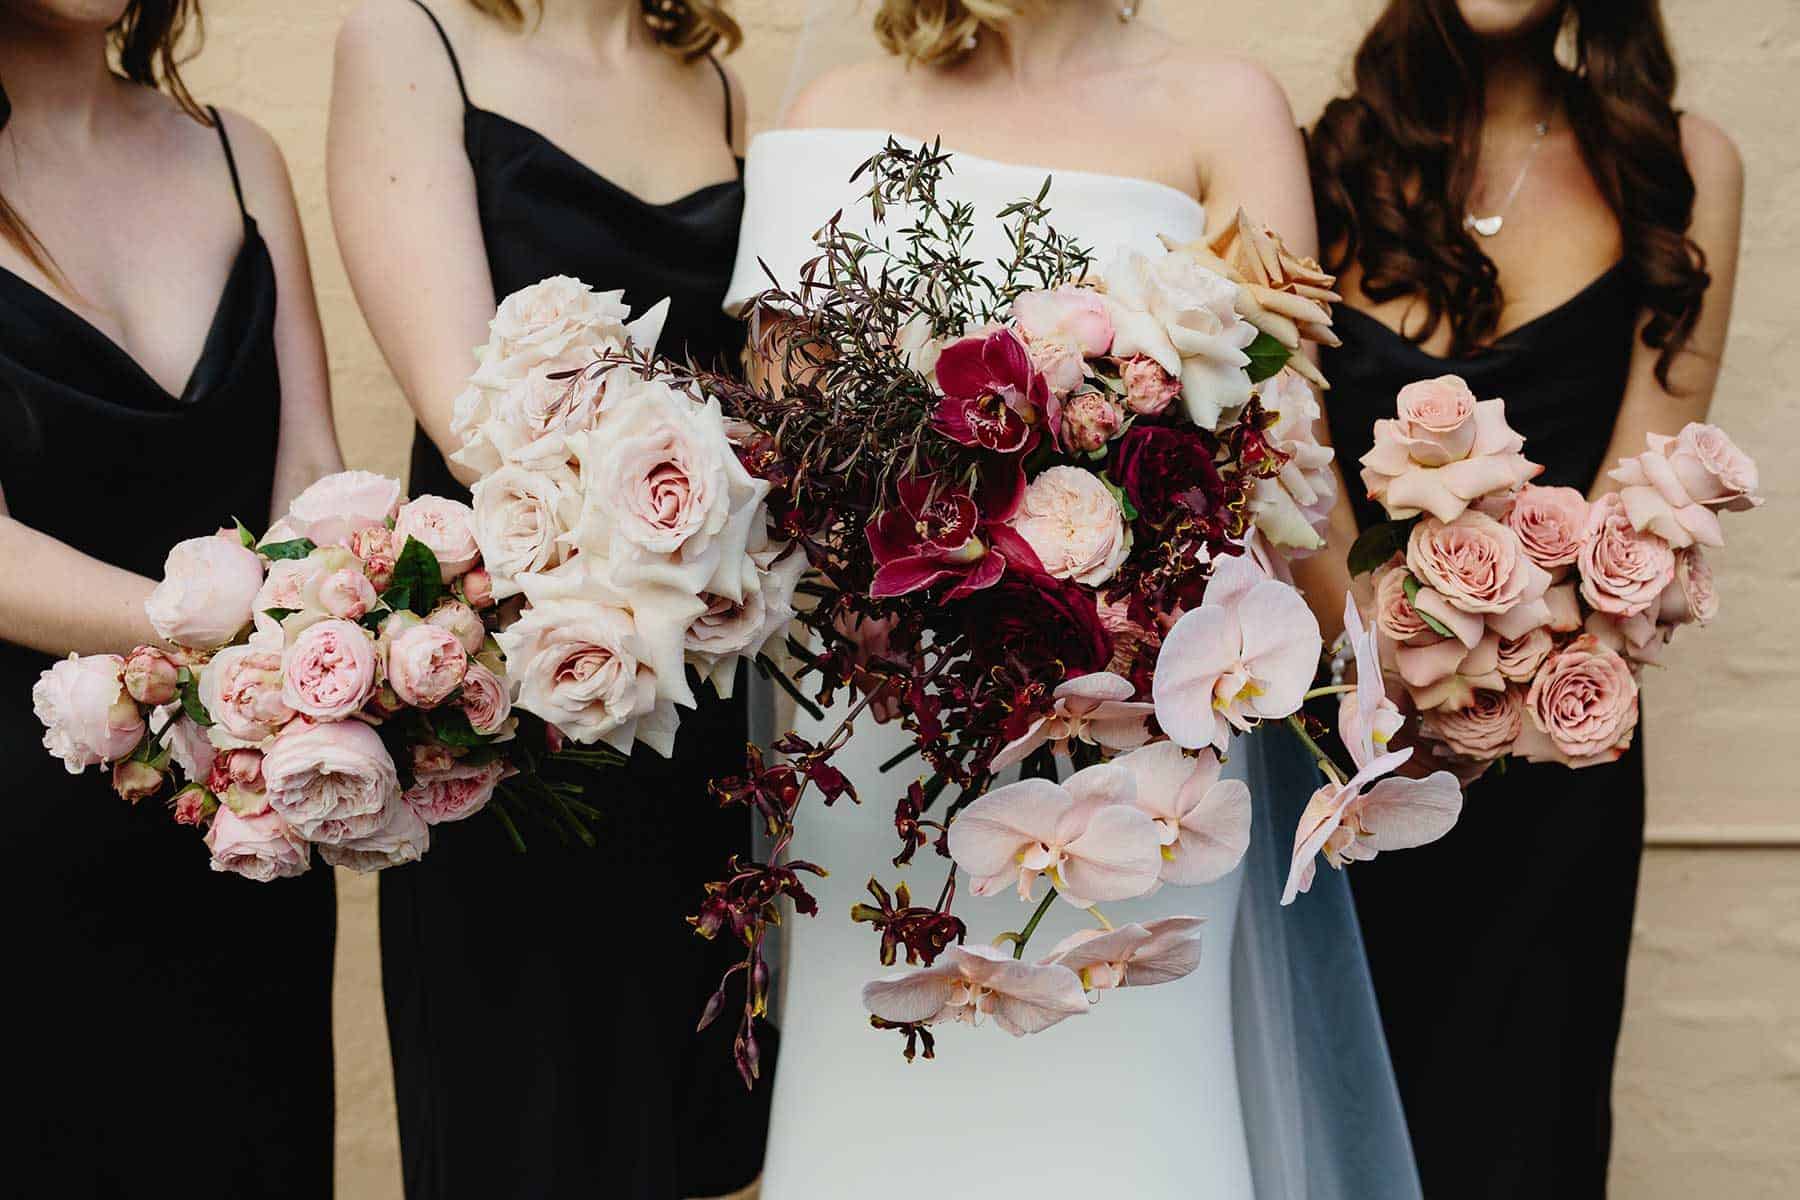 Best bridal bouquets and wedding flowers 2019 - blush and burgundy bouquet